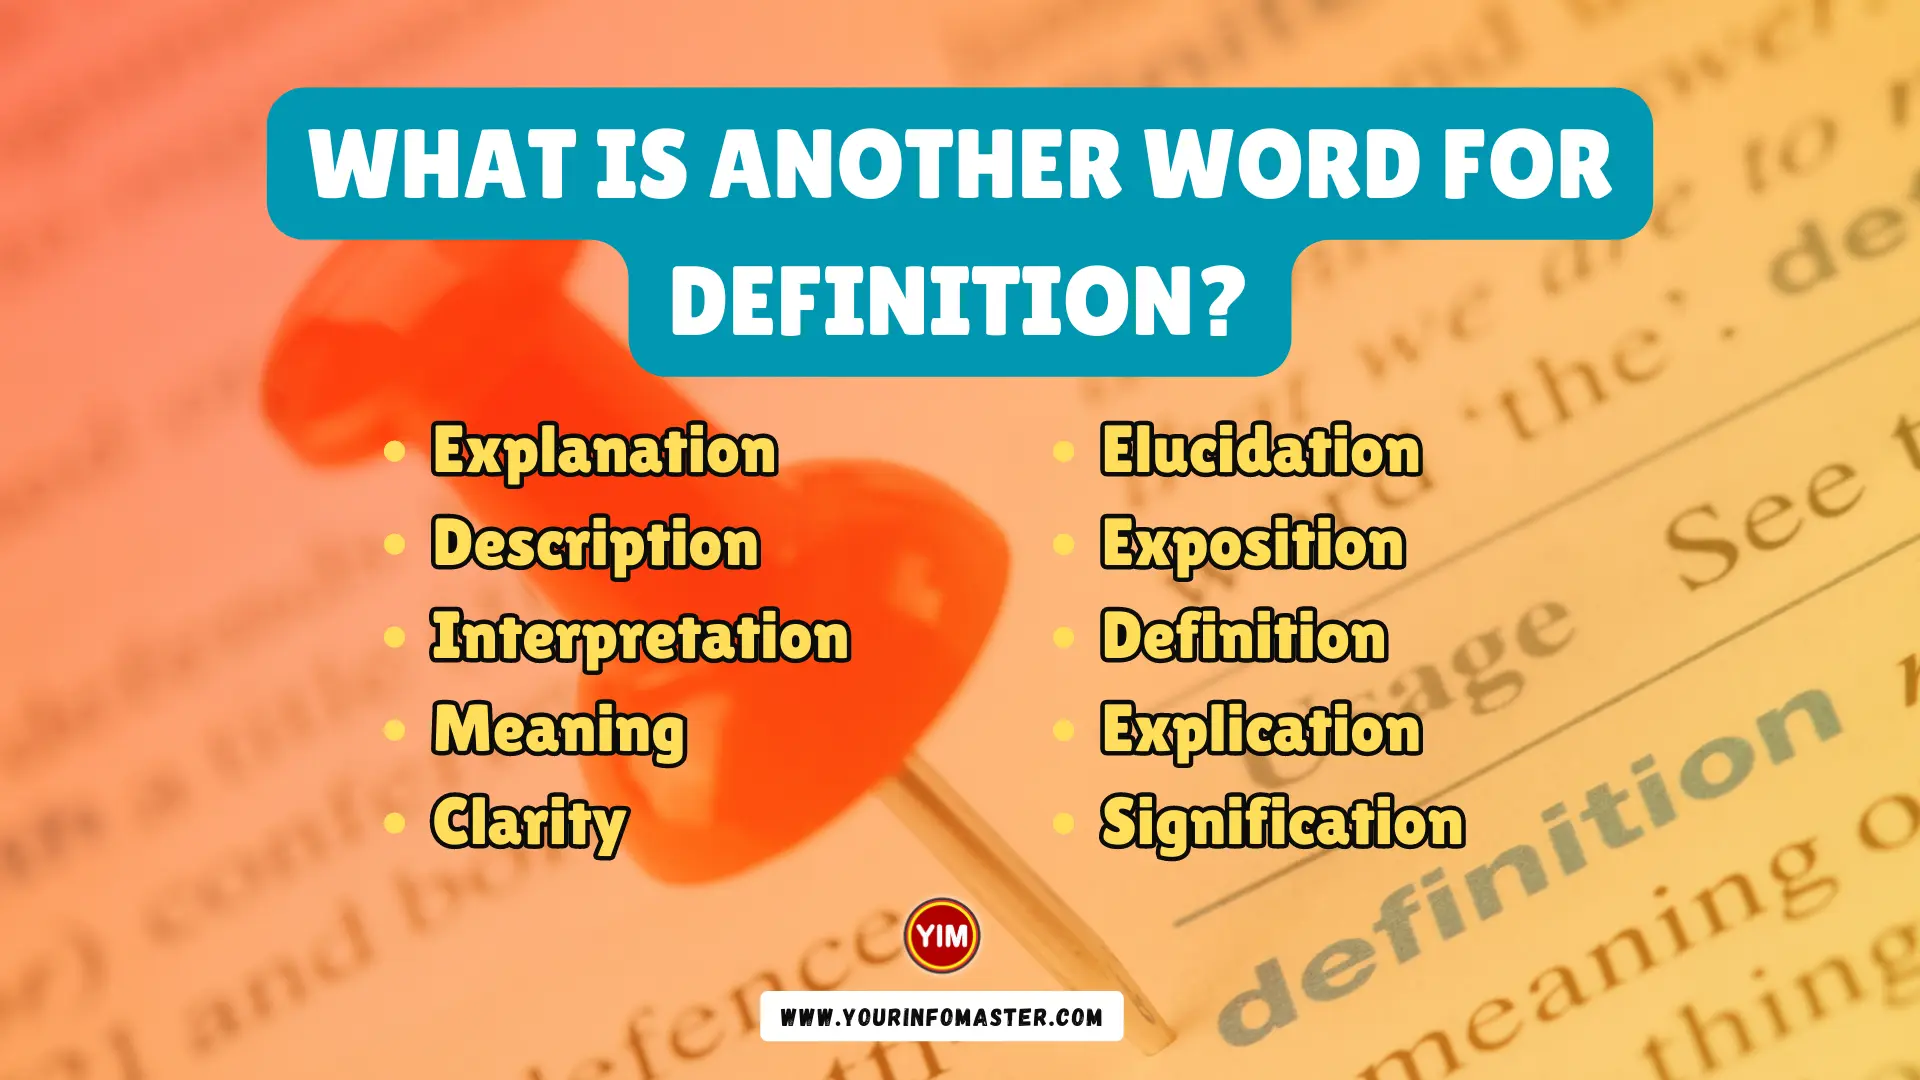 What is another word for Definition